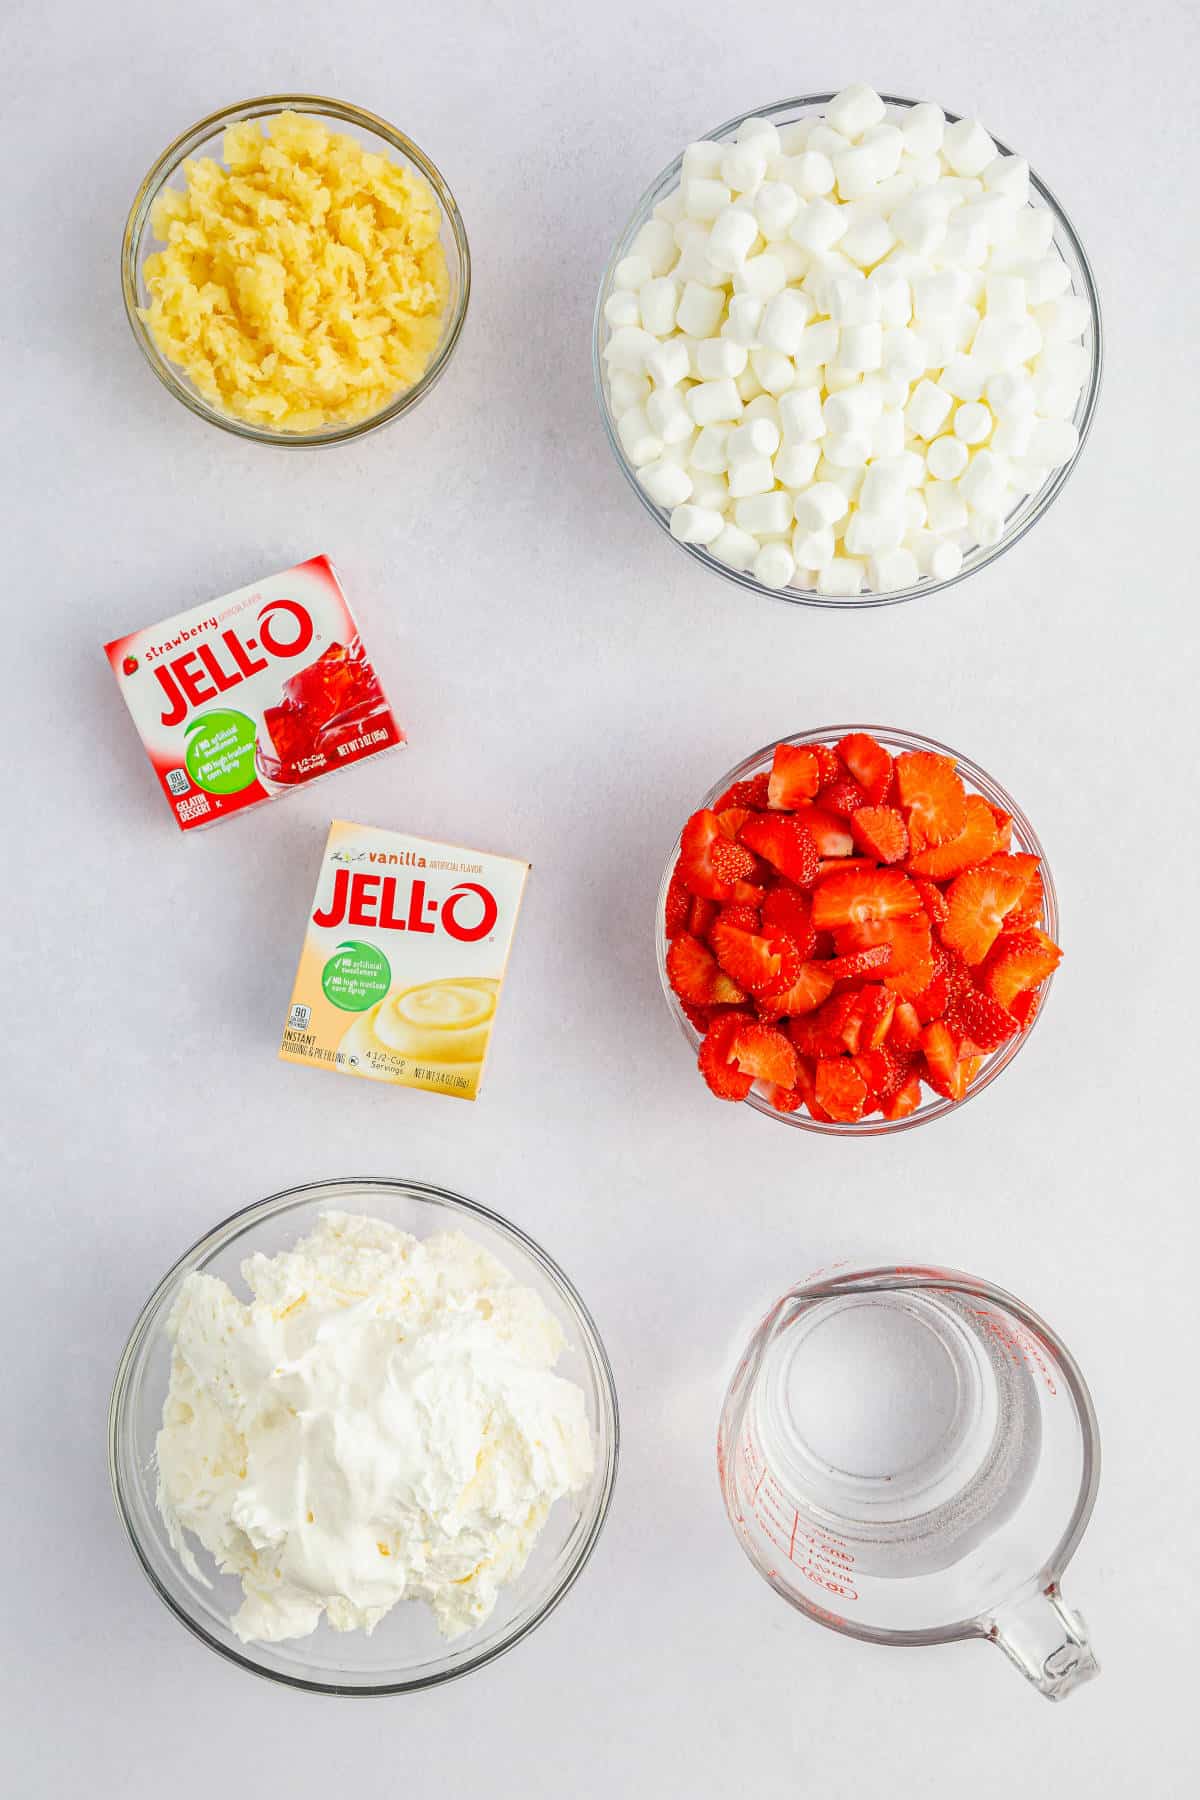 Ingredients for Strawberry Fluff Salad Recipe: strawberry jello mix, vanilla pudding mix, strawberries, pineapple, cool whip, marshmallows, and water.